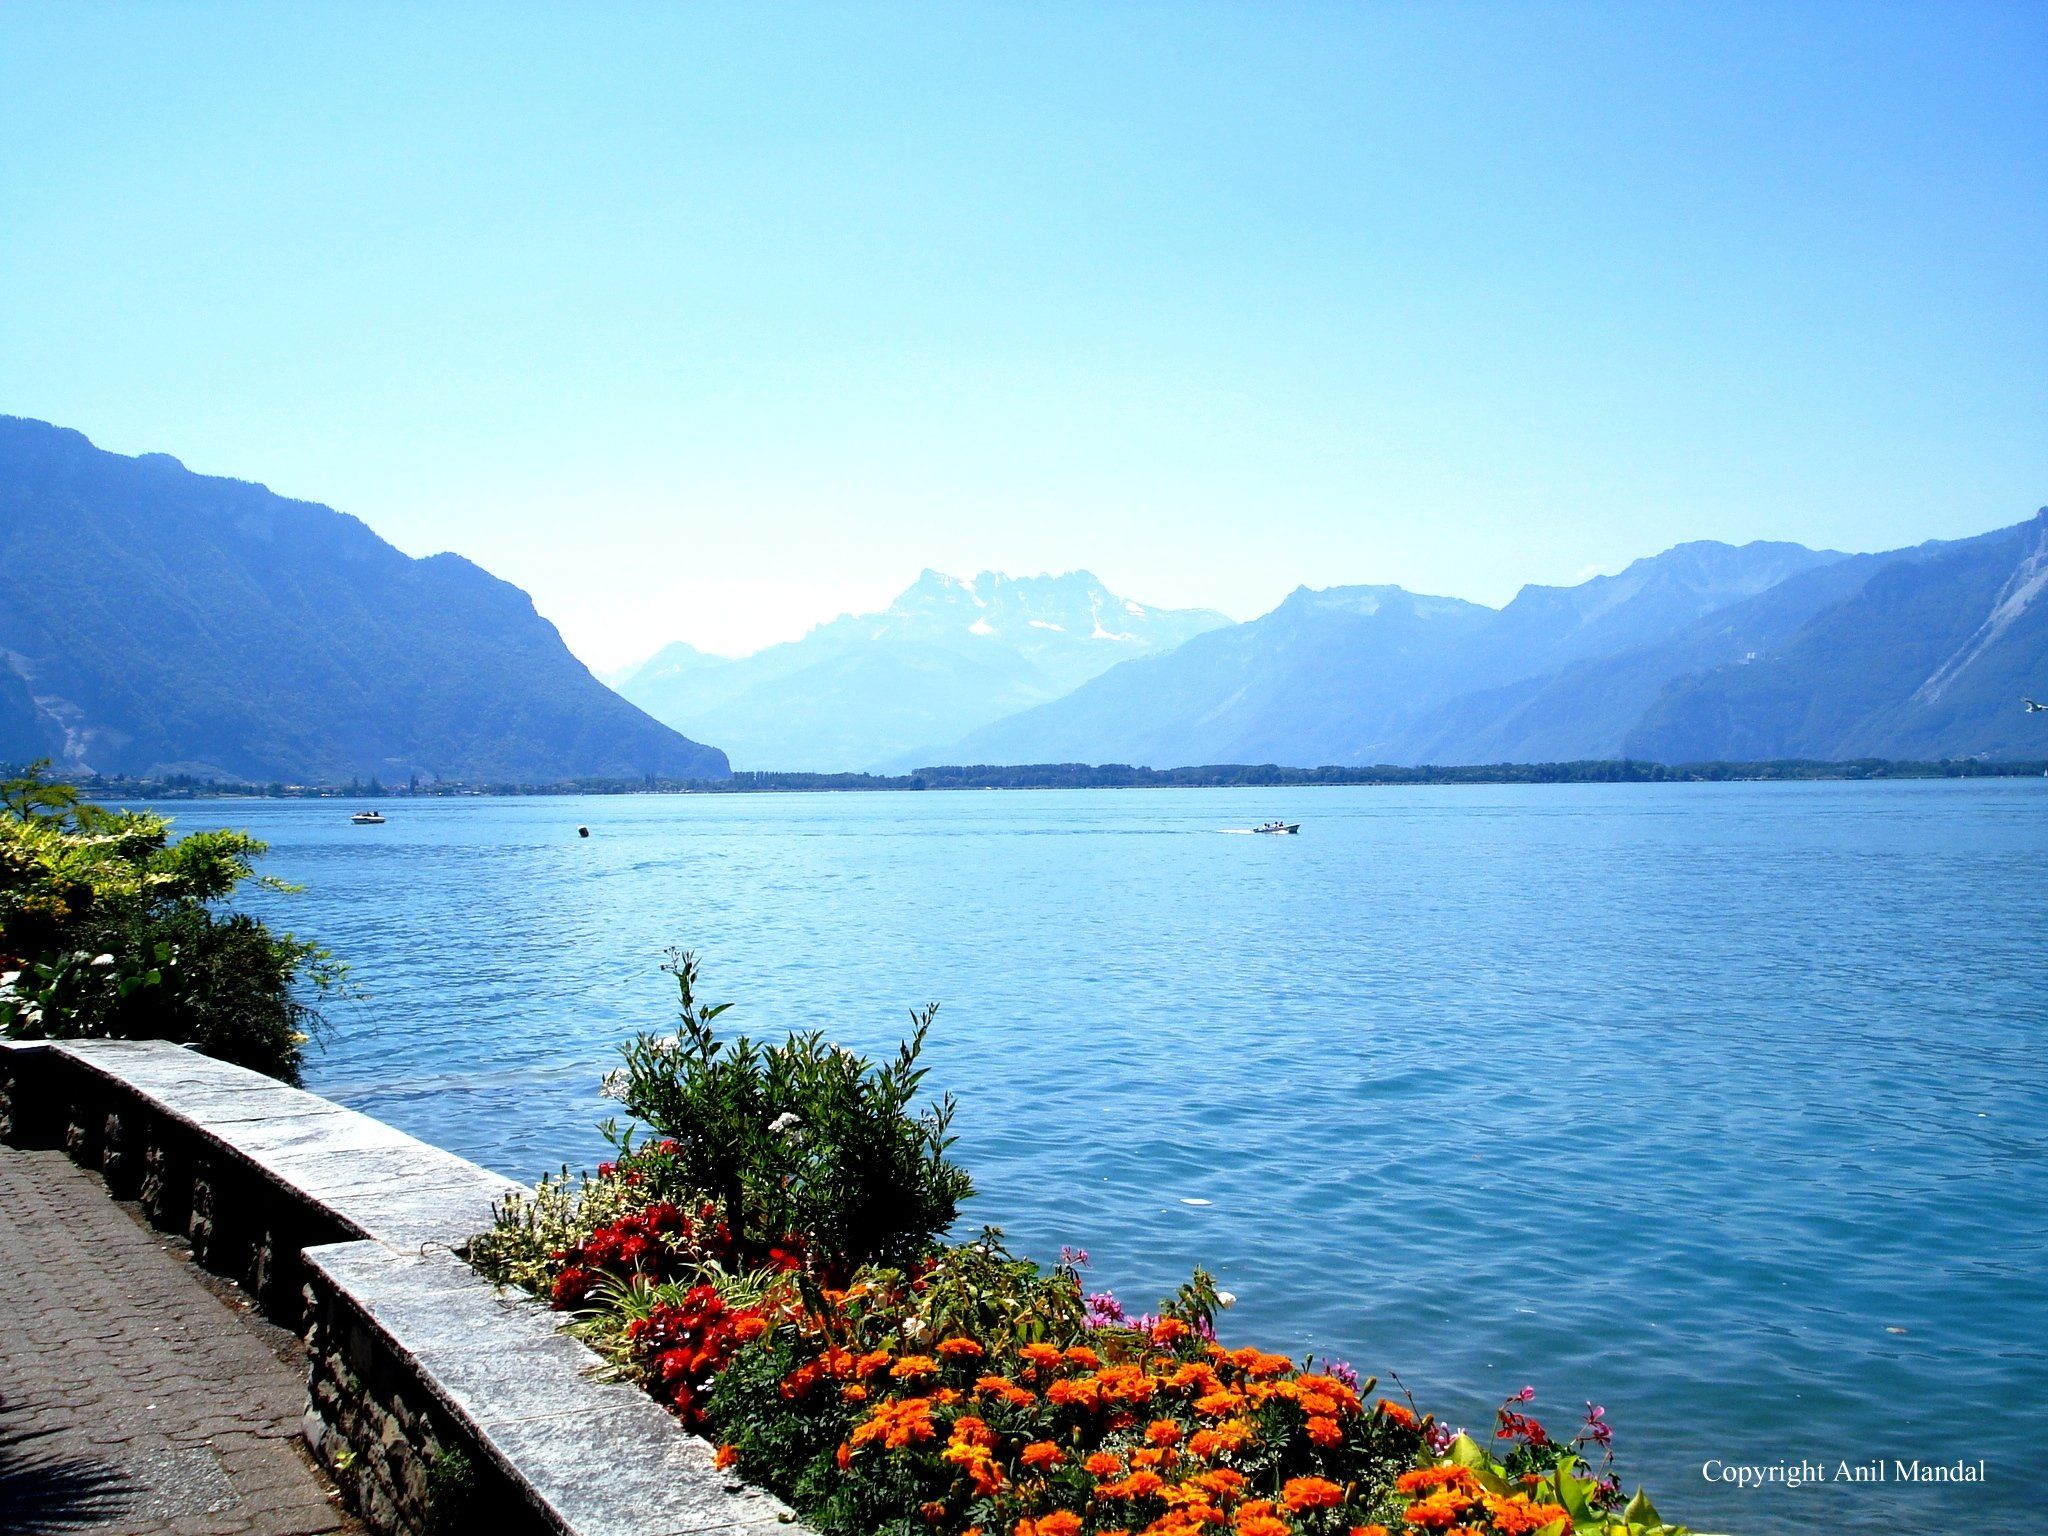 Another View of Lake Geneva at Montreux. Anil's photo journal